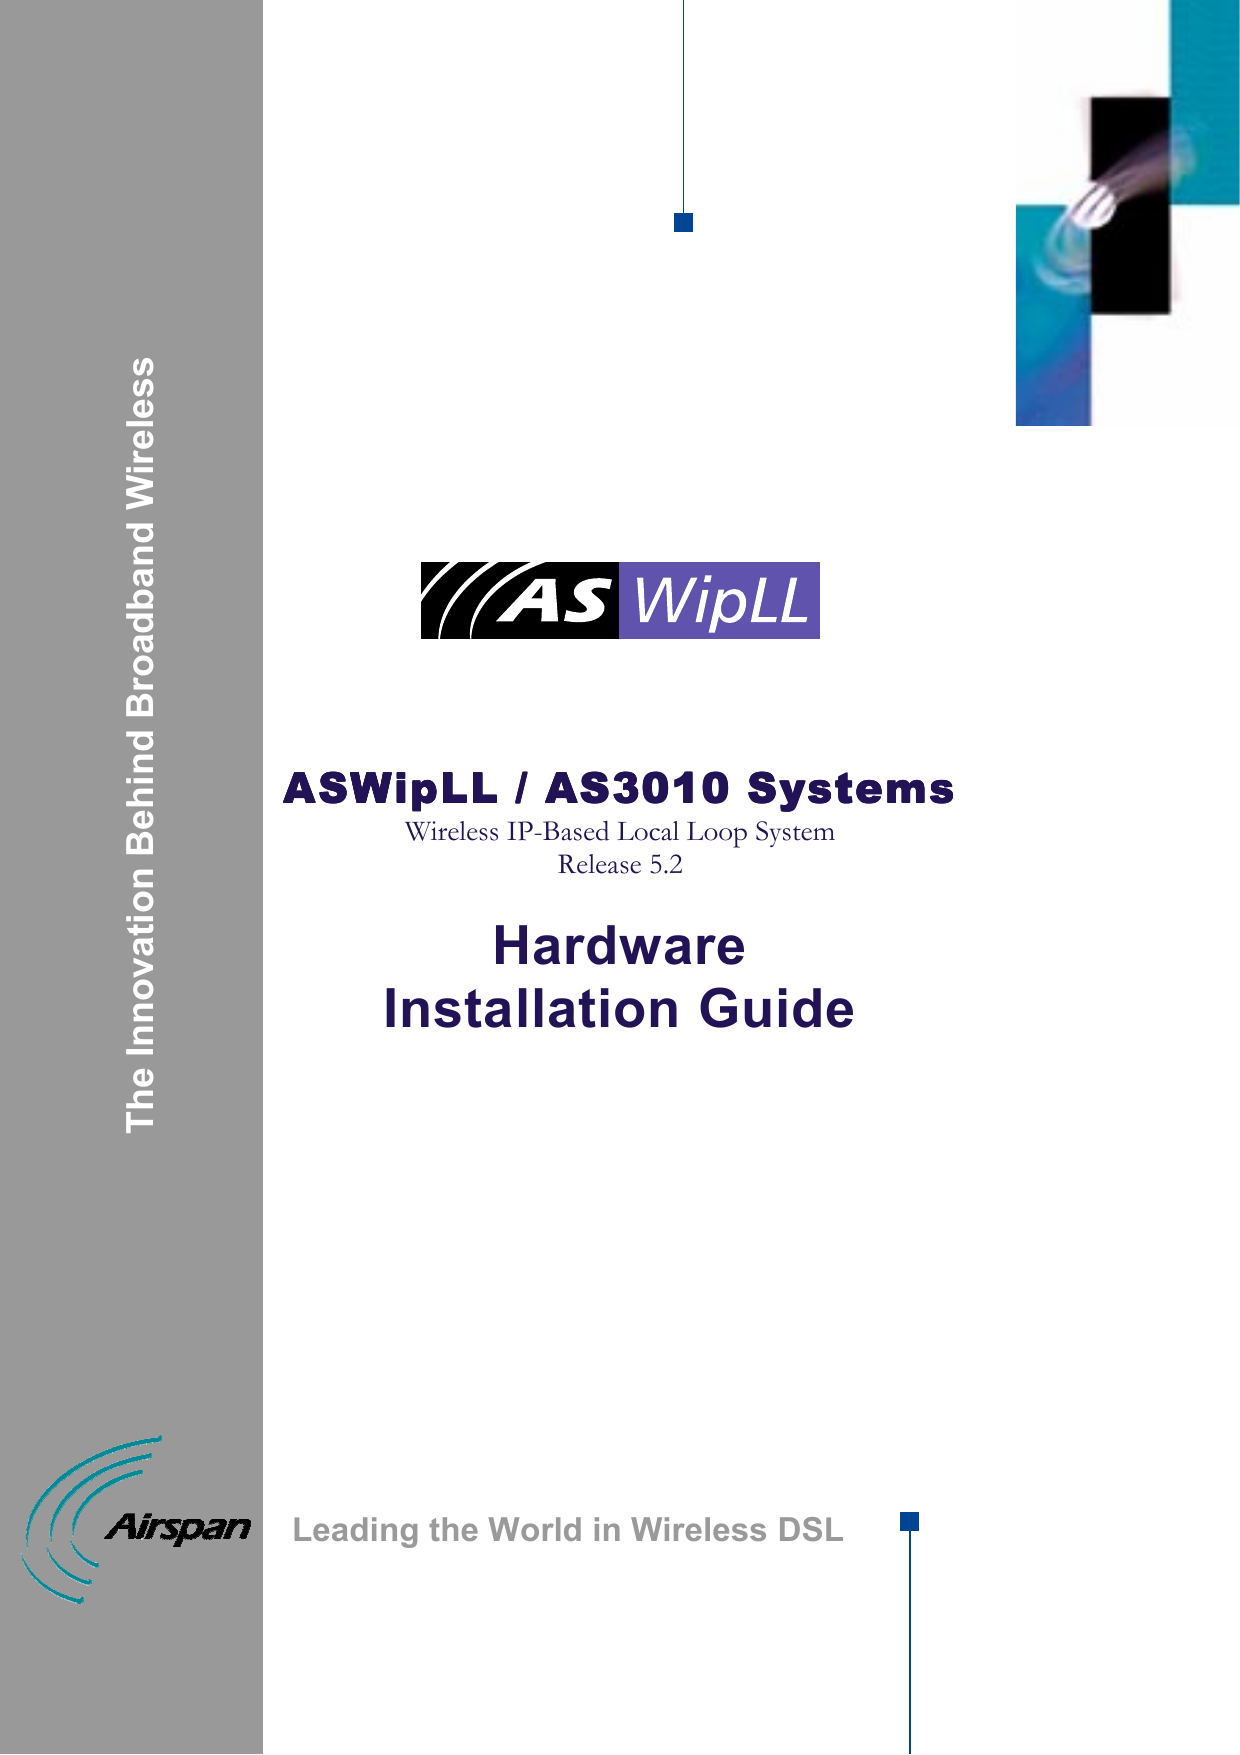                   ASWipLL ASWipLL ASWipLL ASWipLL //// AS3010 Systems AS3010 Systems AS3010 Systems AS3010 Systems    Wireless IP-Based Local Loop System Release 5.2  Hardware Installation Guide                              The Innovation Behind Broadband Wireless Leading the World in Wireless DSL 